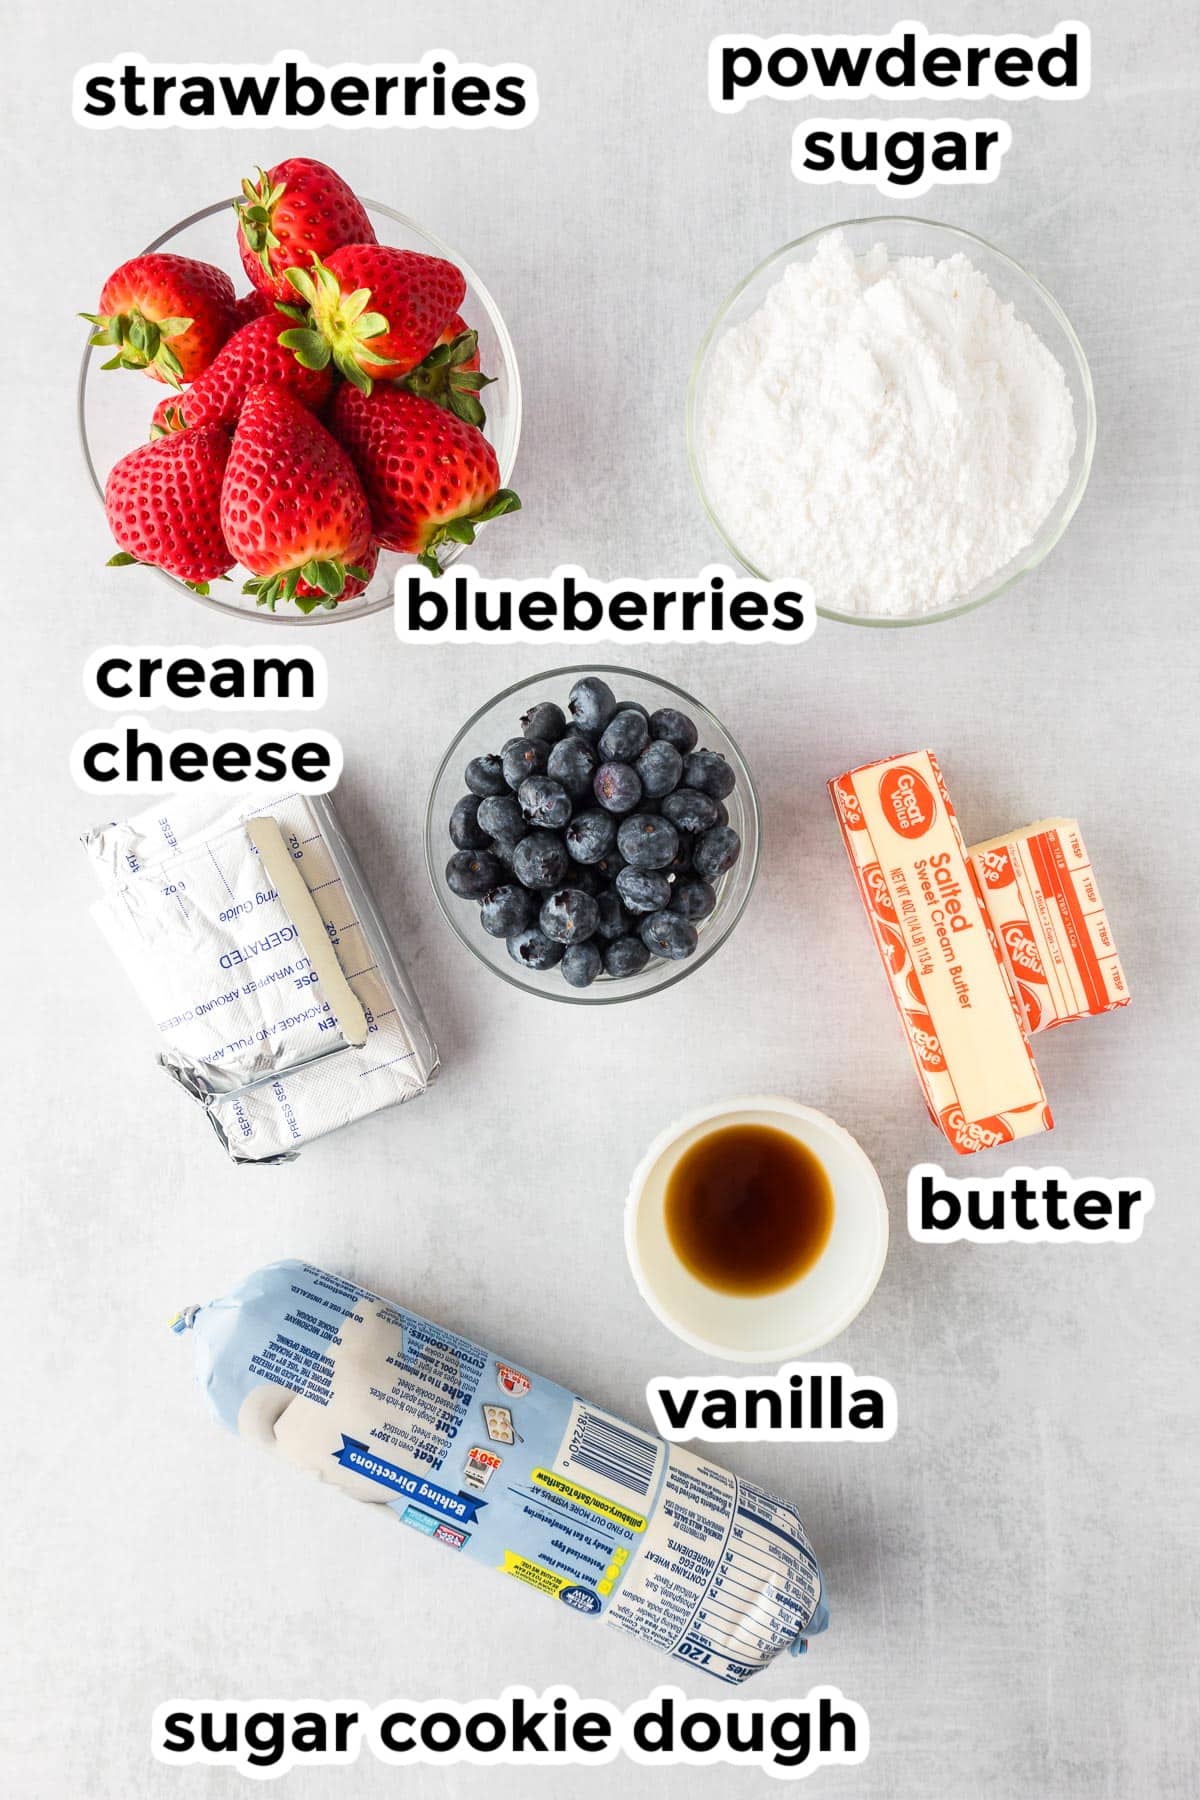 Ingredients for flag fruit pizza including strawberries, powdered sugar, cream cheese, blueberries, butter, vanilla extract, and a roll of sugar cookie dough on a counter with text labels.